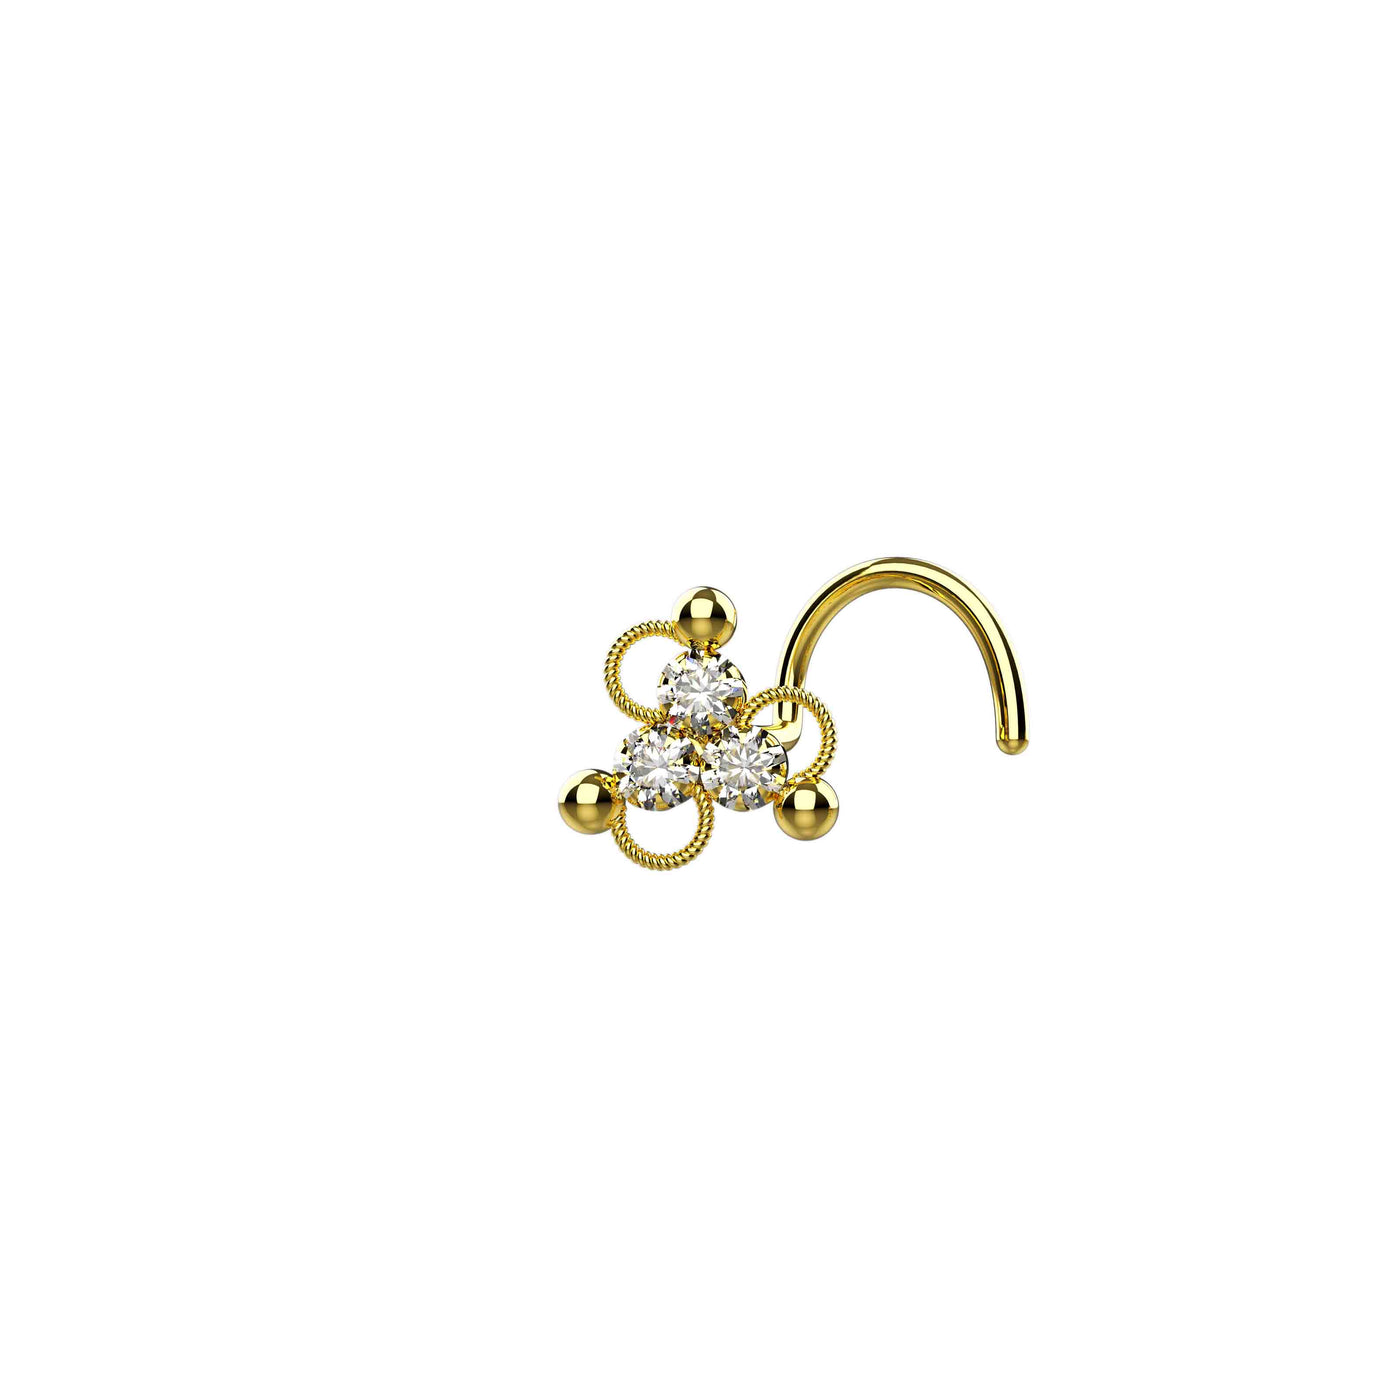 Daisy Flower Gold Nose Pin